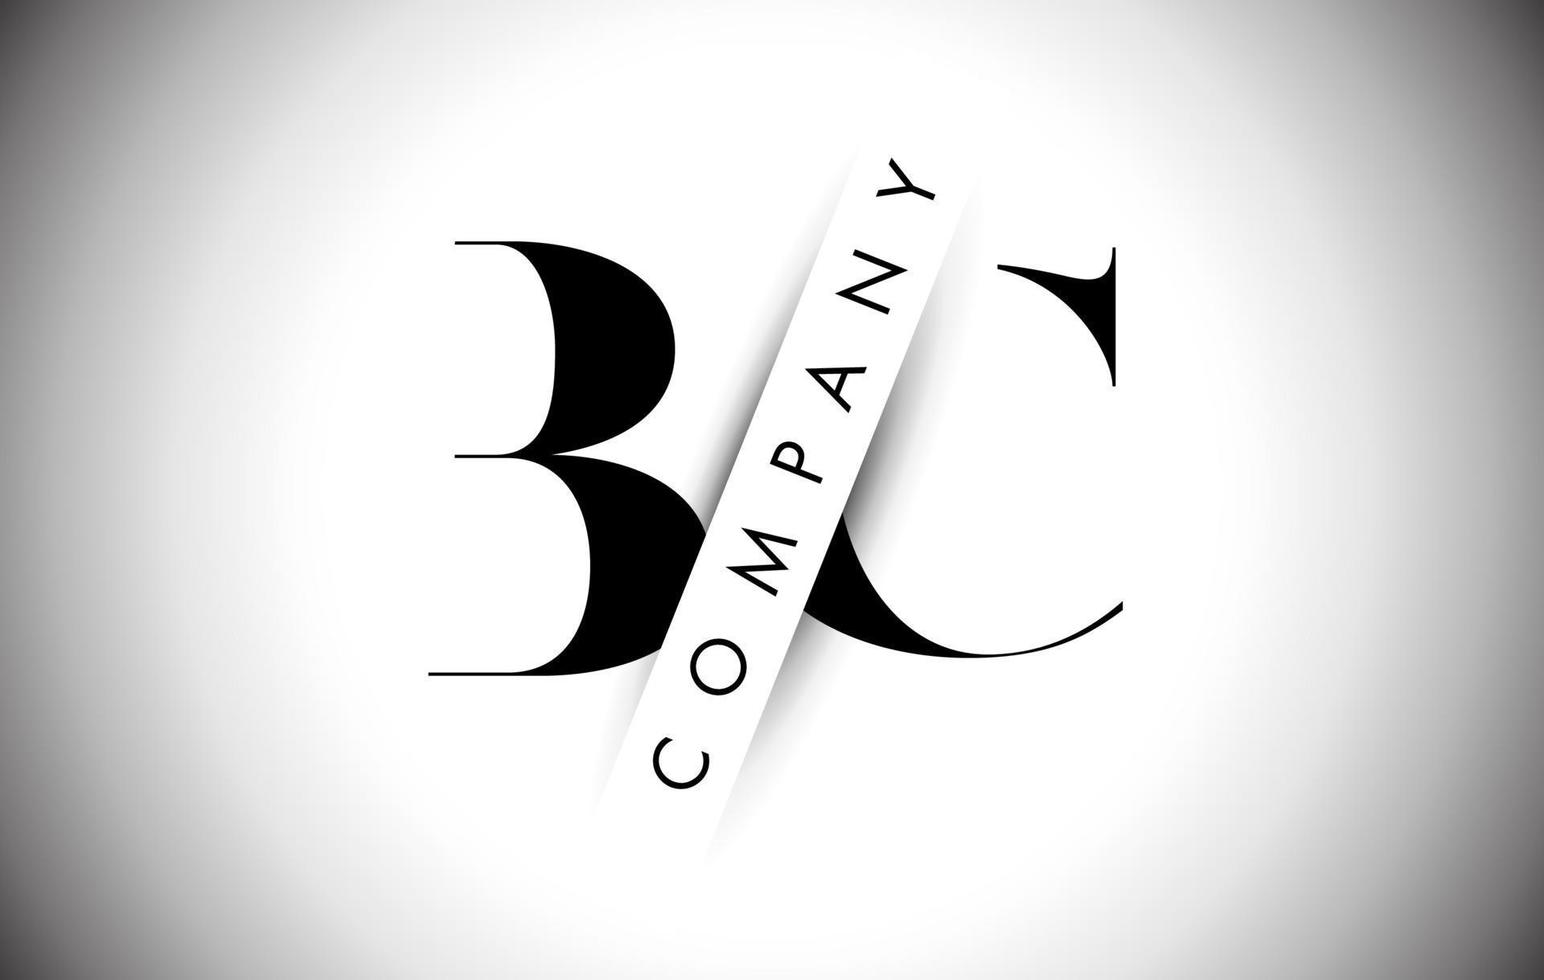 BC B C Letter Logo with Creative Shadow Cut and Overlayered Text Design. vector